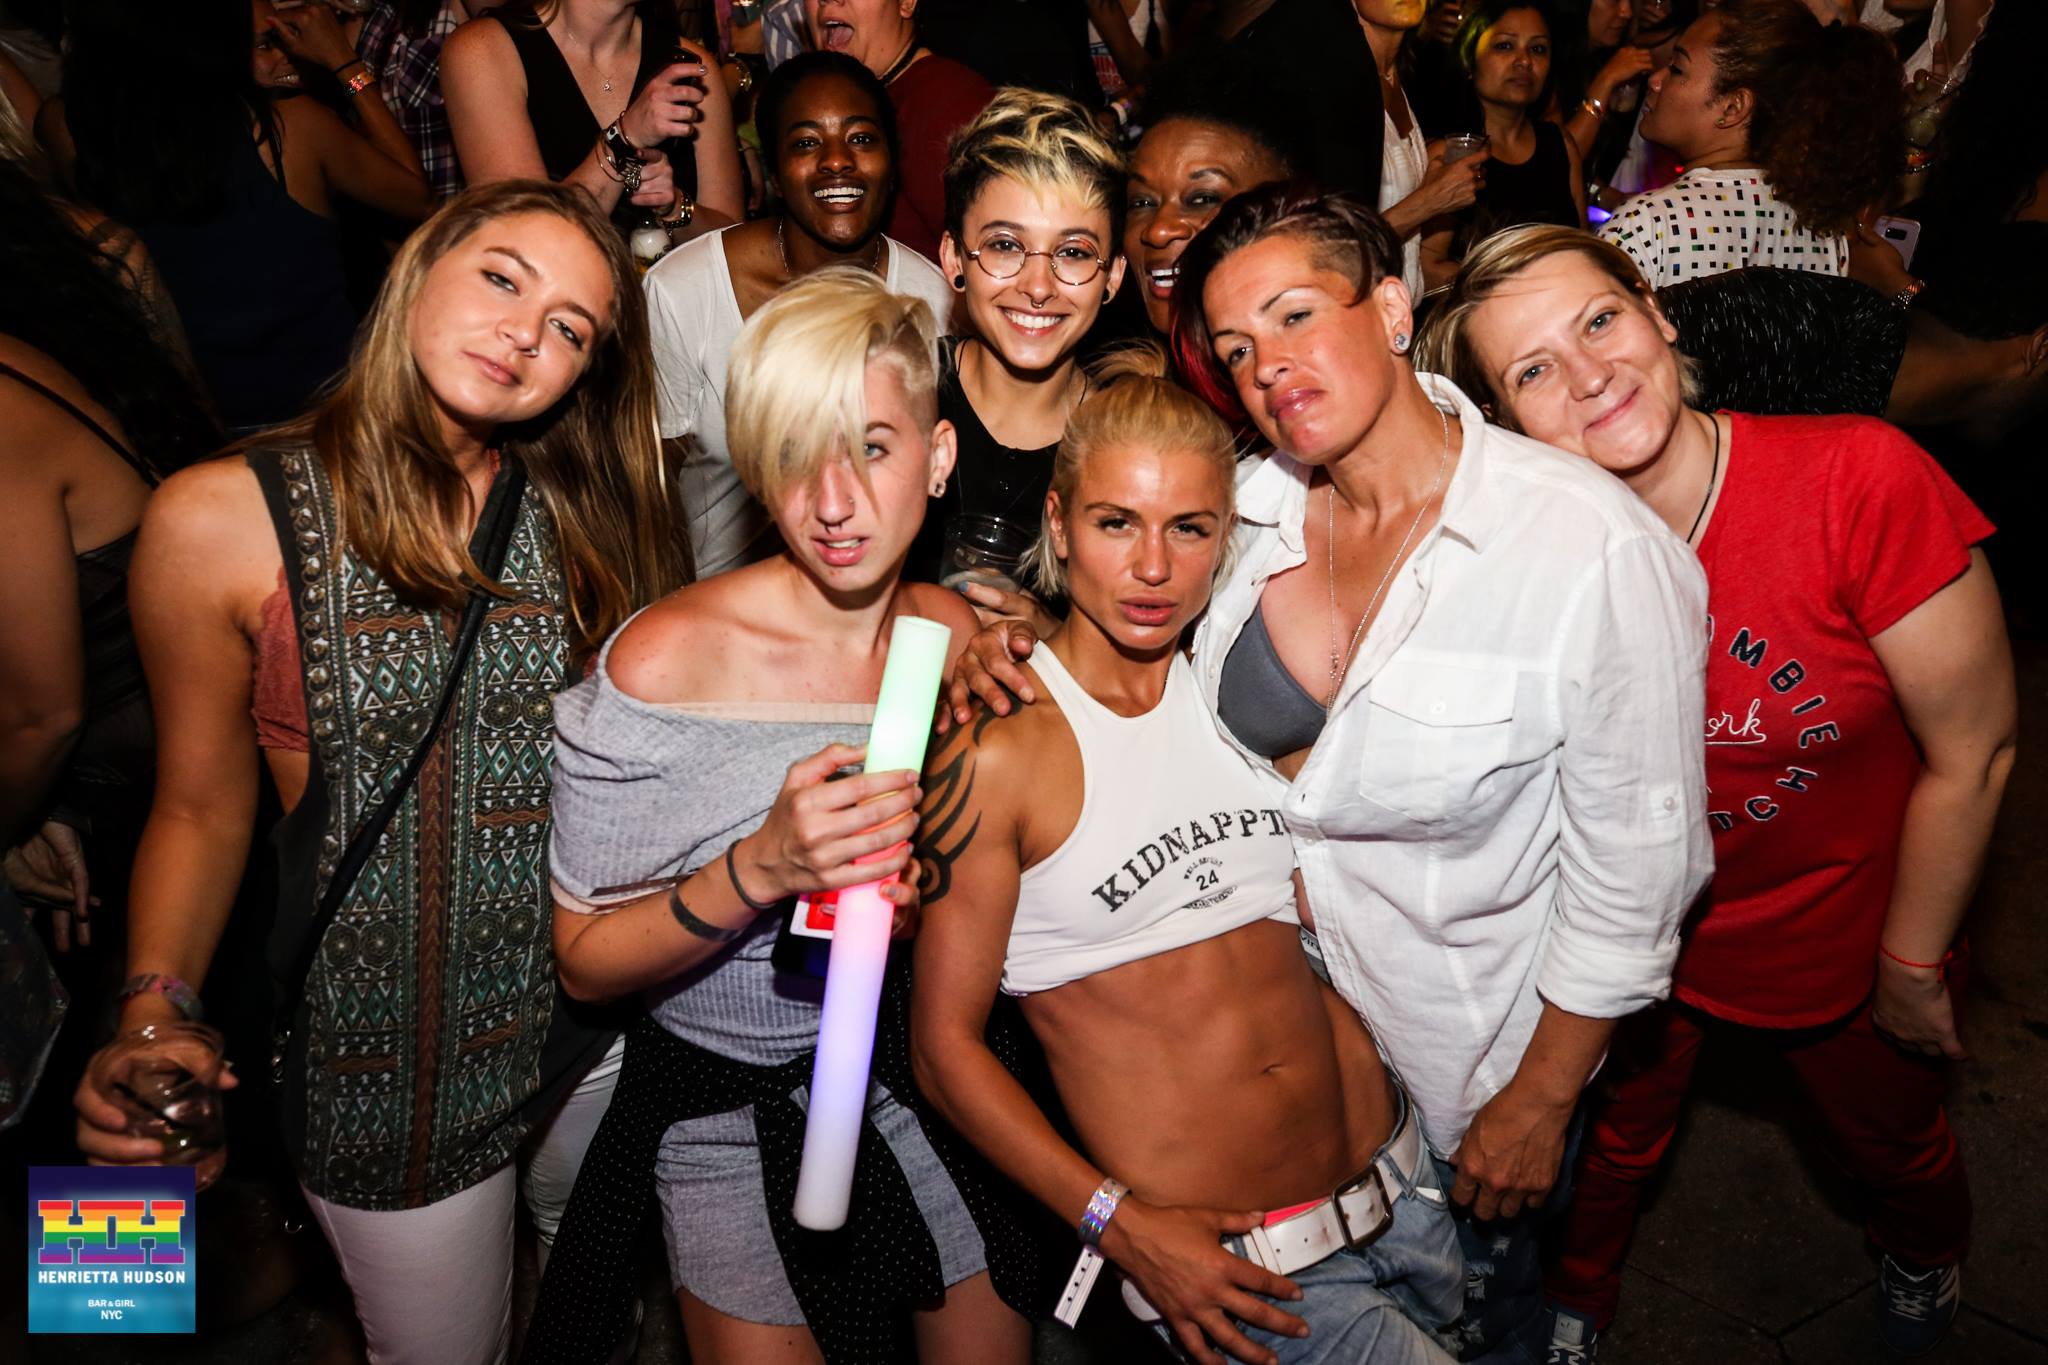 allison cherry recommends young lesbian bars nyc pic